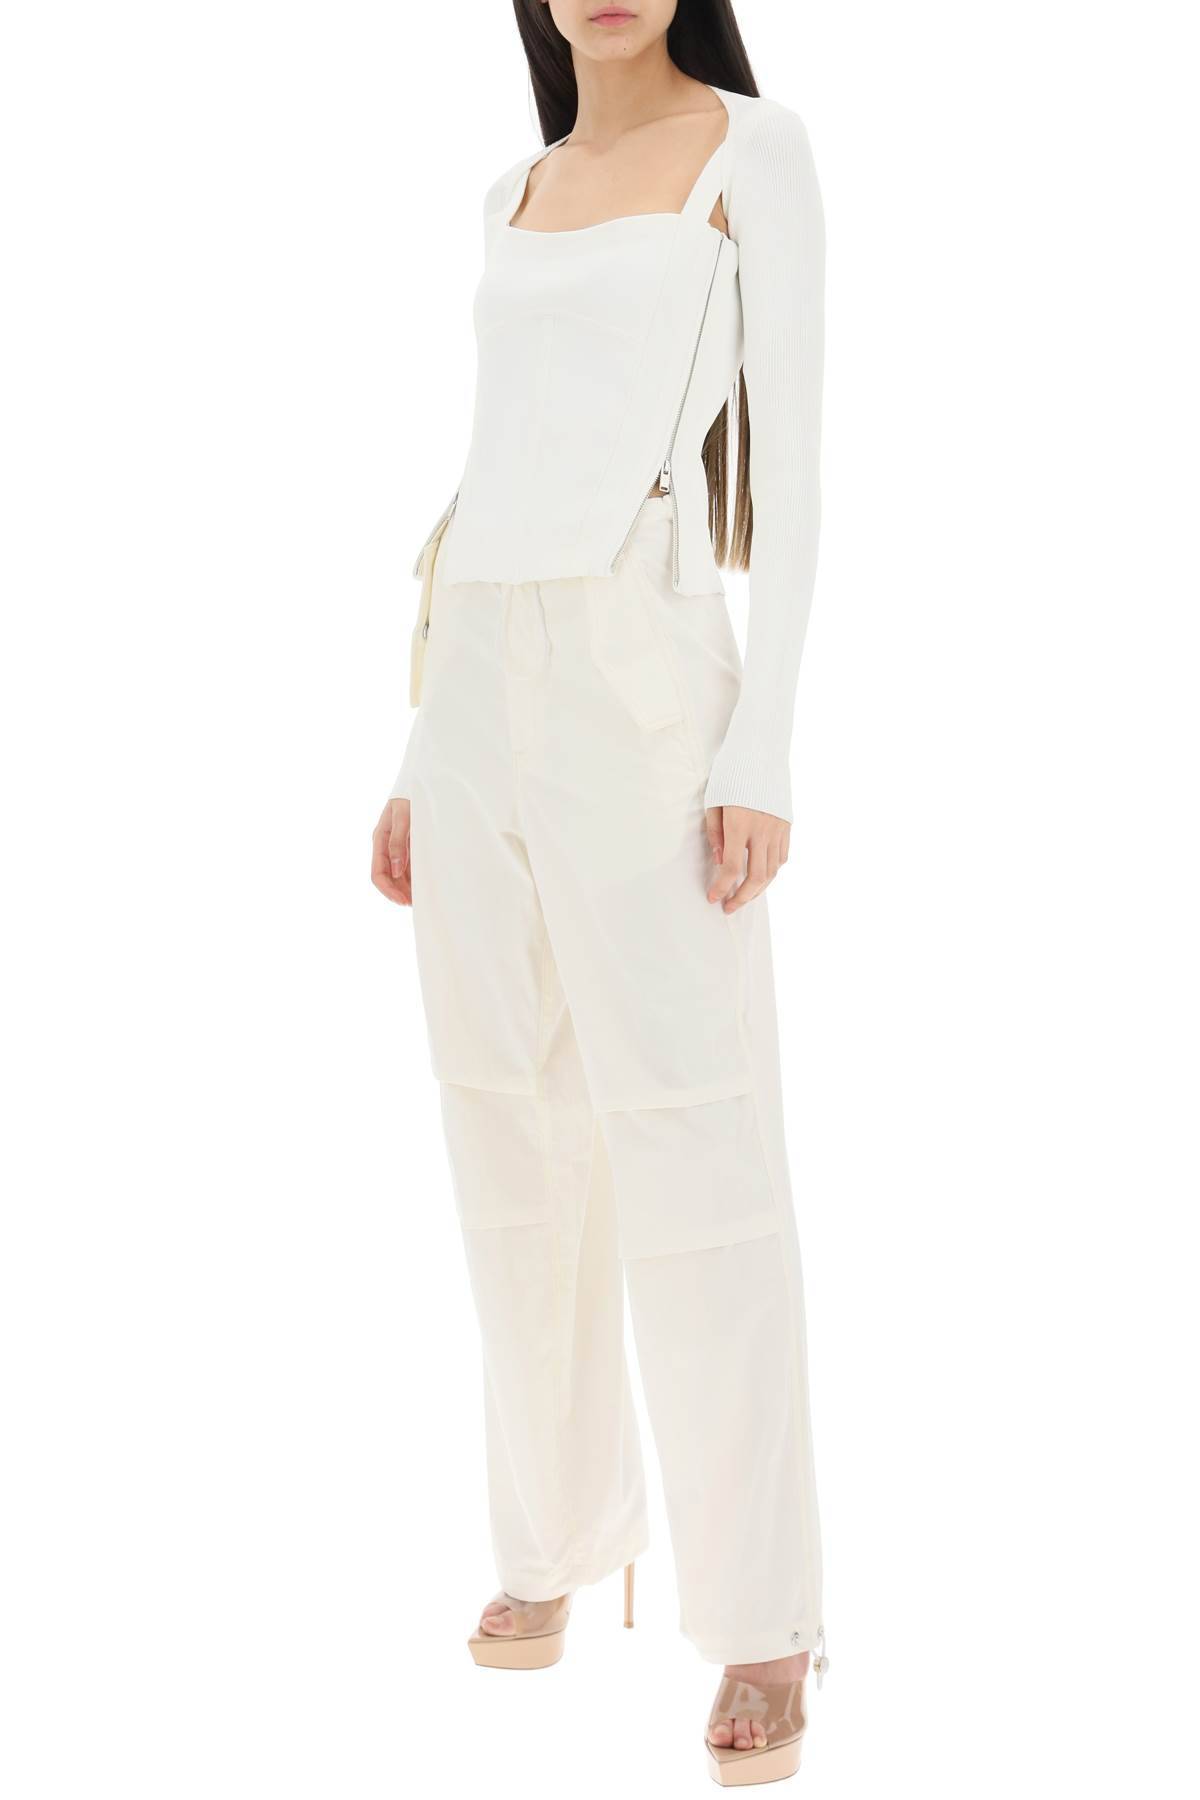 Shop Dion Lee Modular Corset Top In White